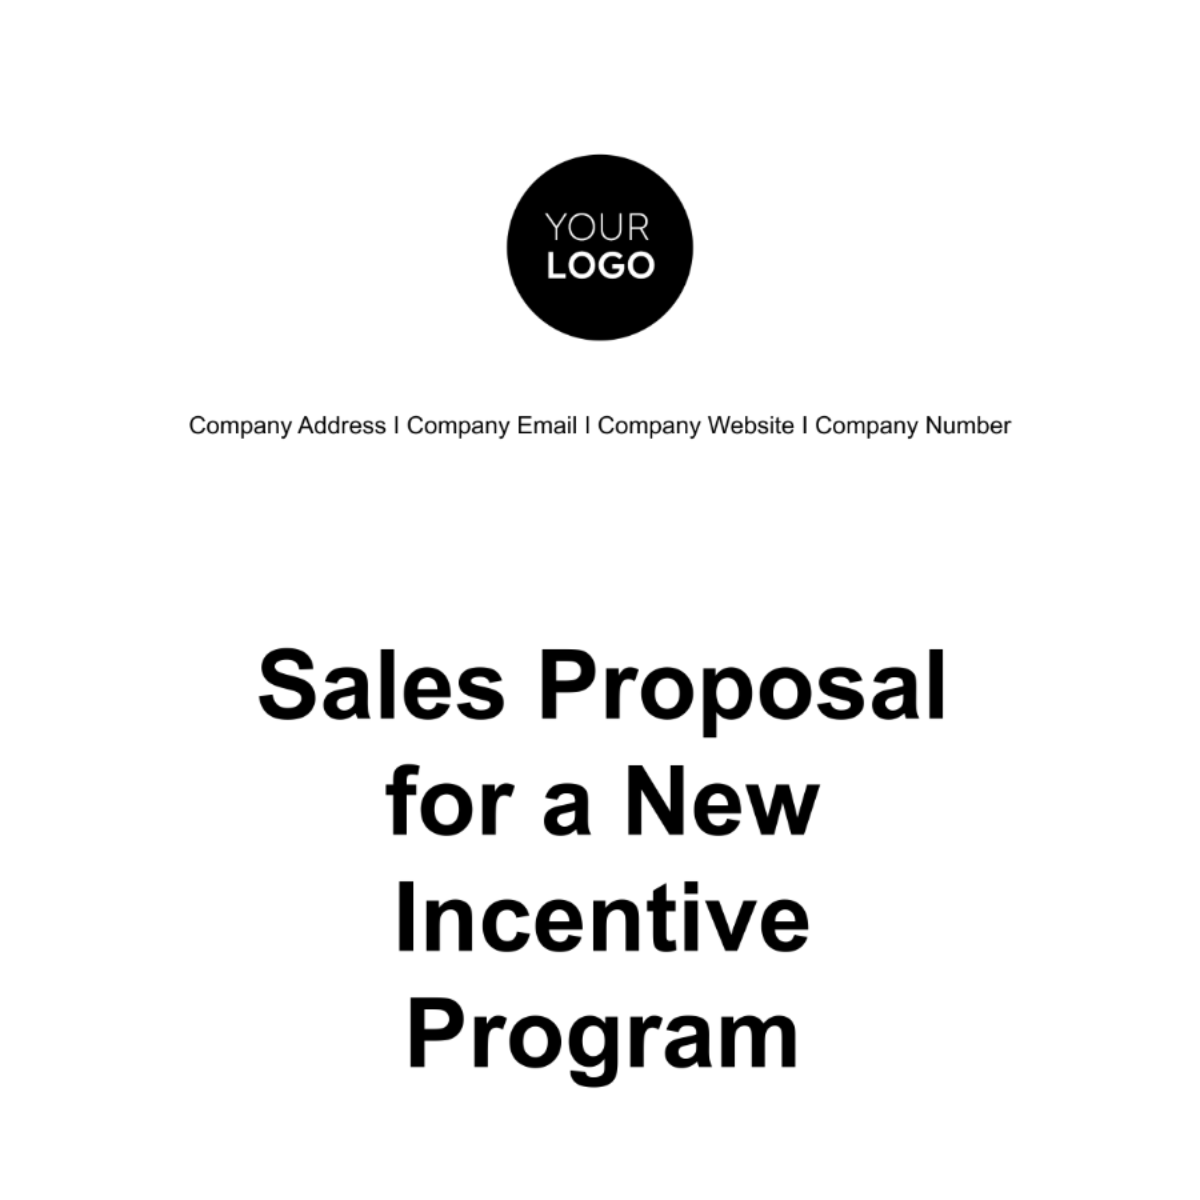 Free Sales Proposal for a New Incentive Program Template